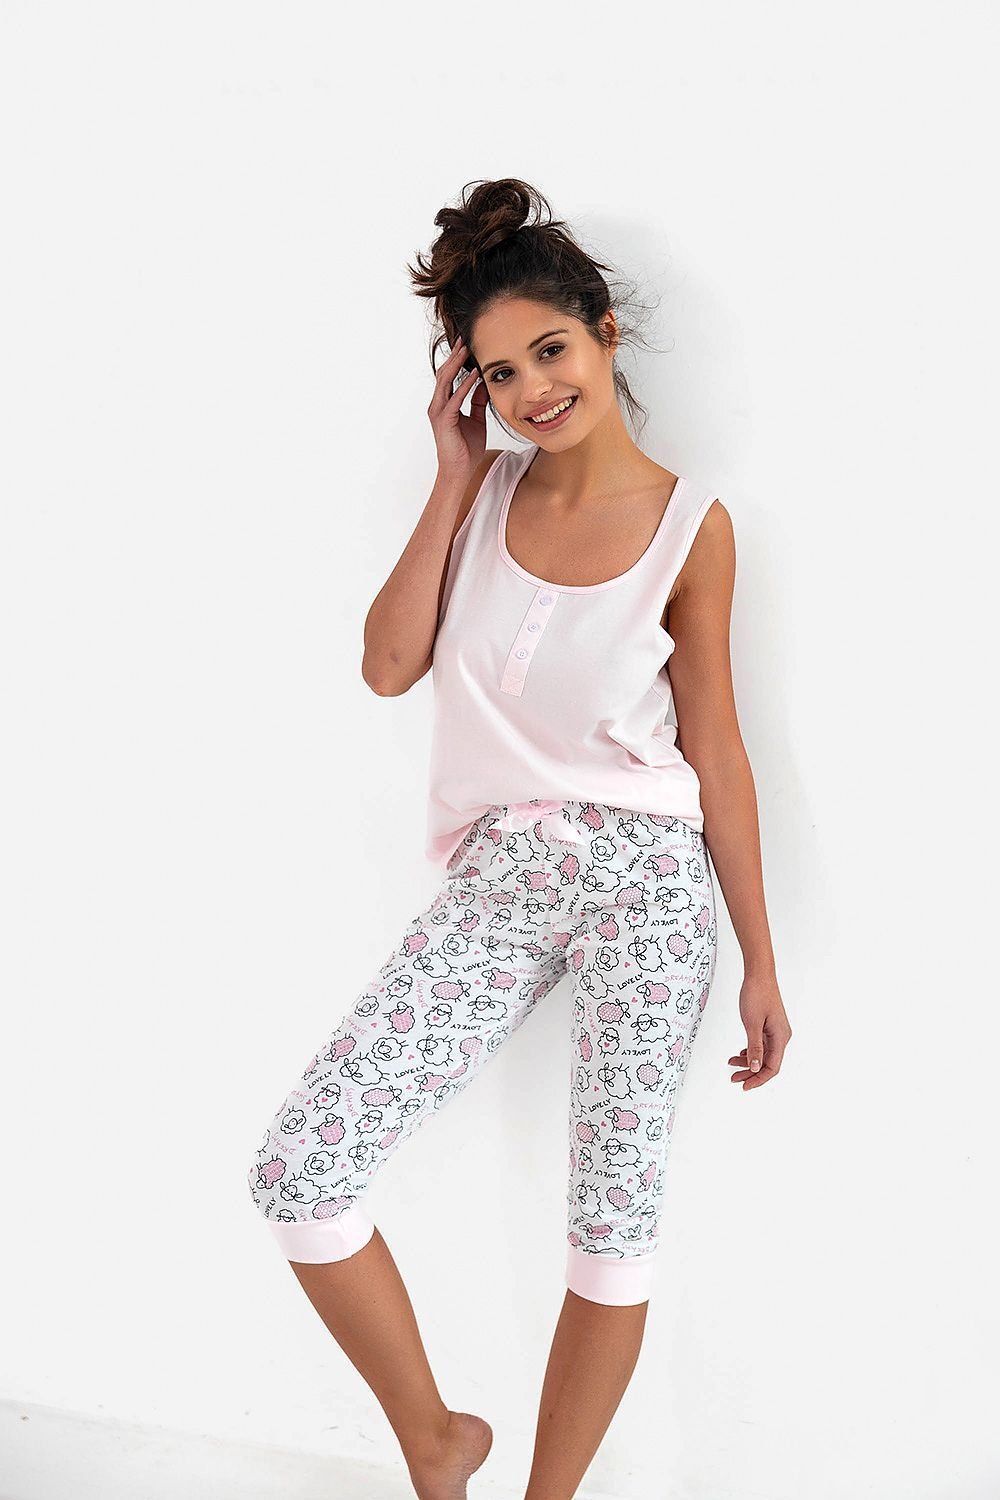 Pyjama set - M&H FashionPyjama setM&H FashionM&H Fashion178583_10533315902921433767LPyjama SensisM&H FashionM&H FashionWomen's pajamas sewn from soft and airy cotton in light pink and patterned pants. Cotton shirt in a solid color on wide straps, round neckline, buttoned. To completePyjama set